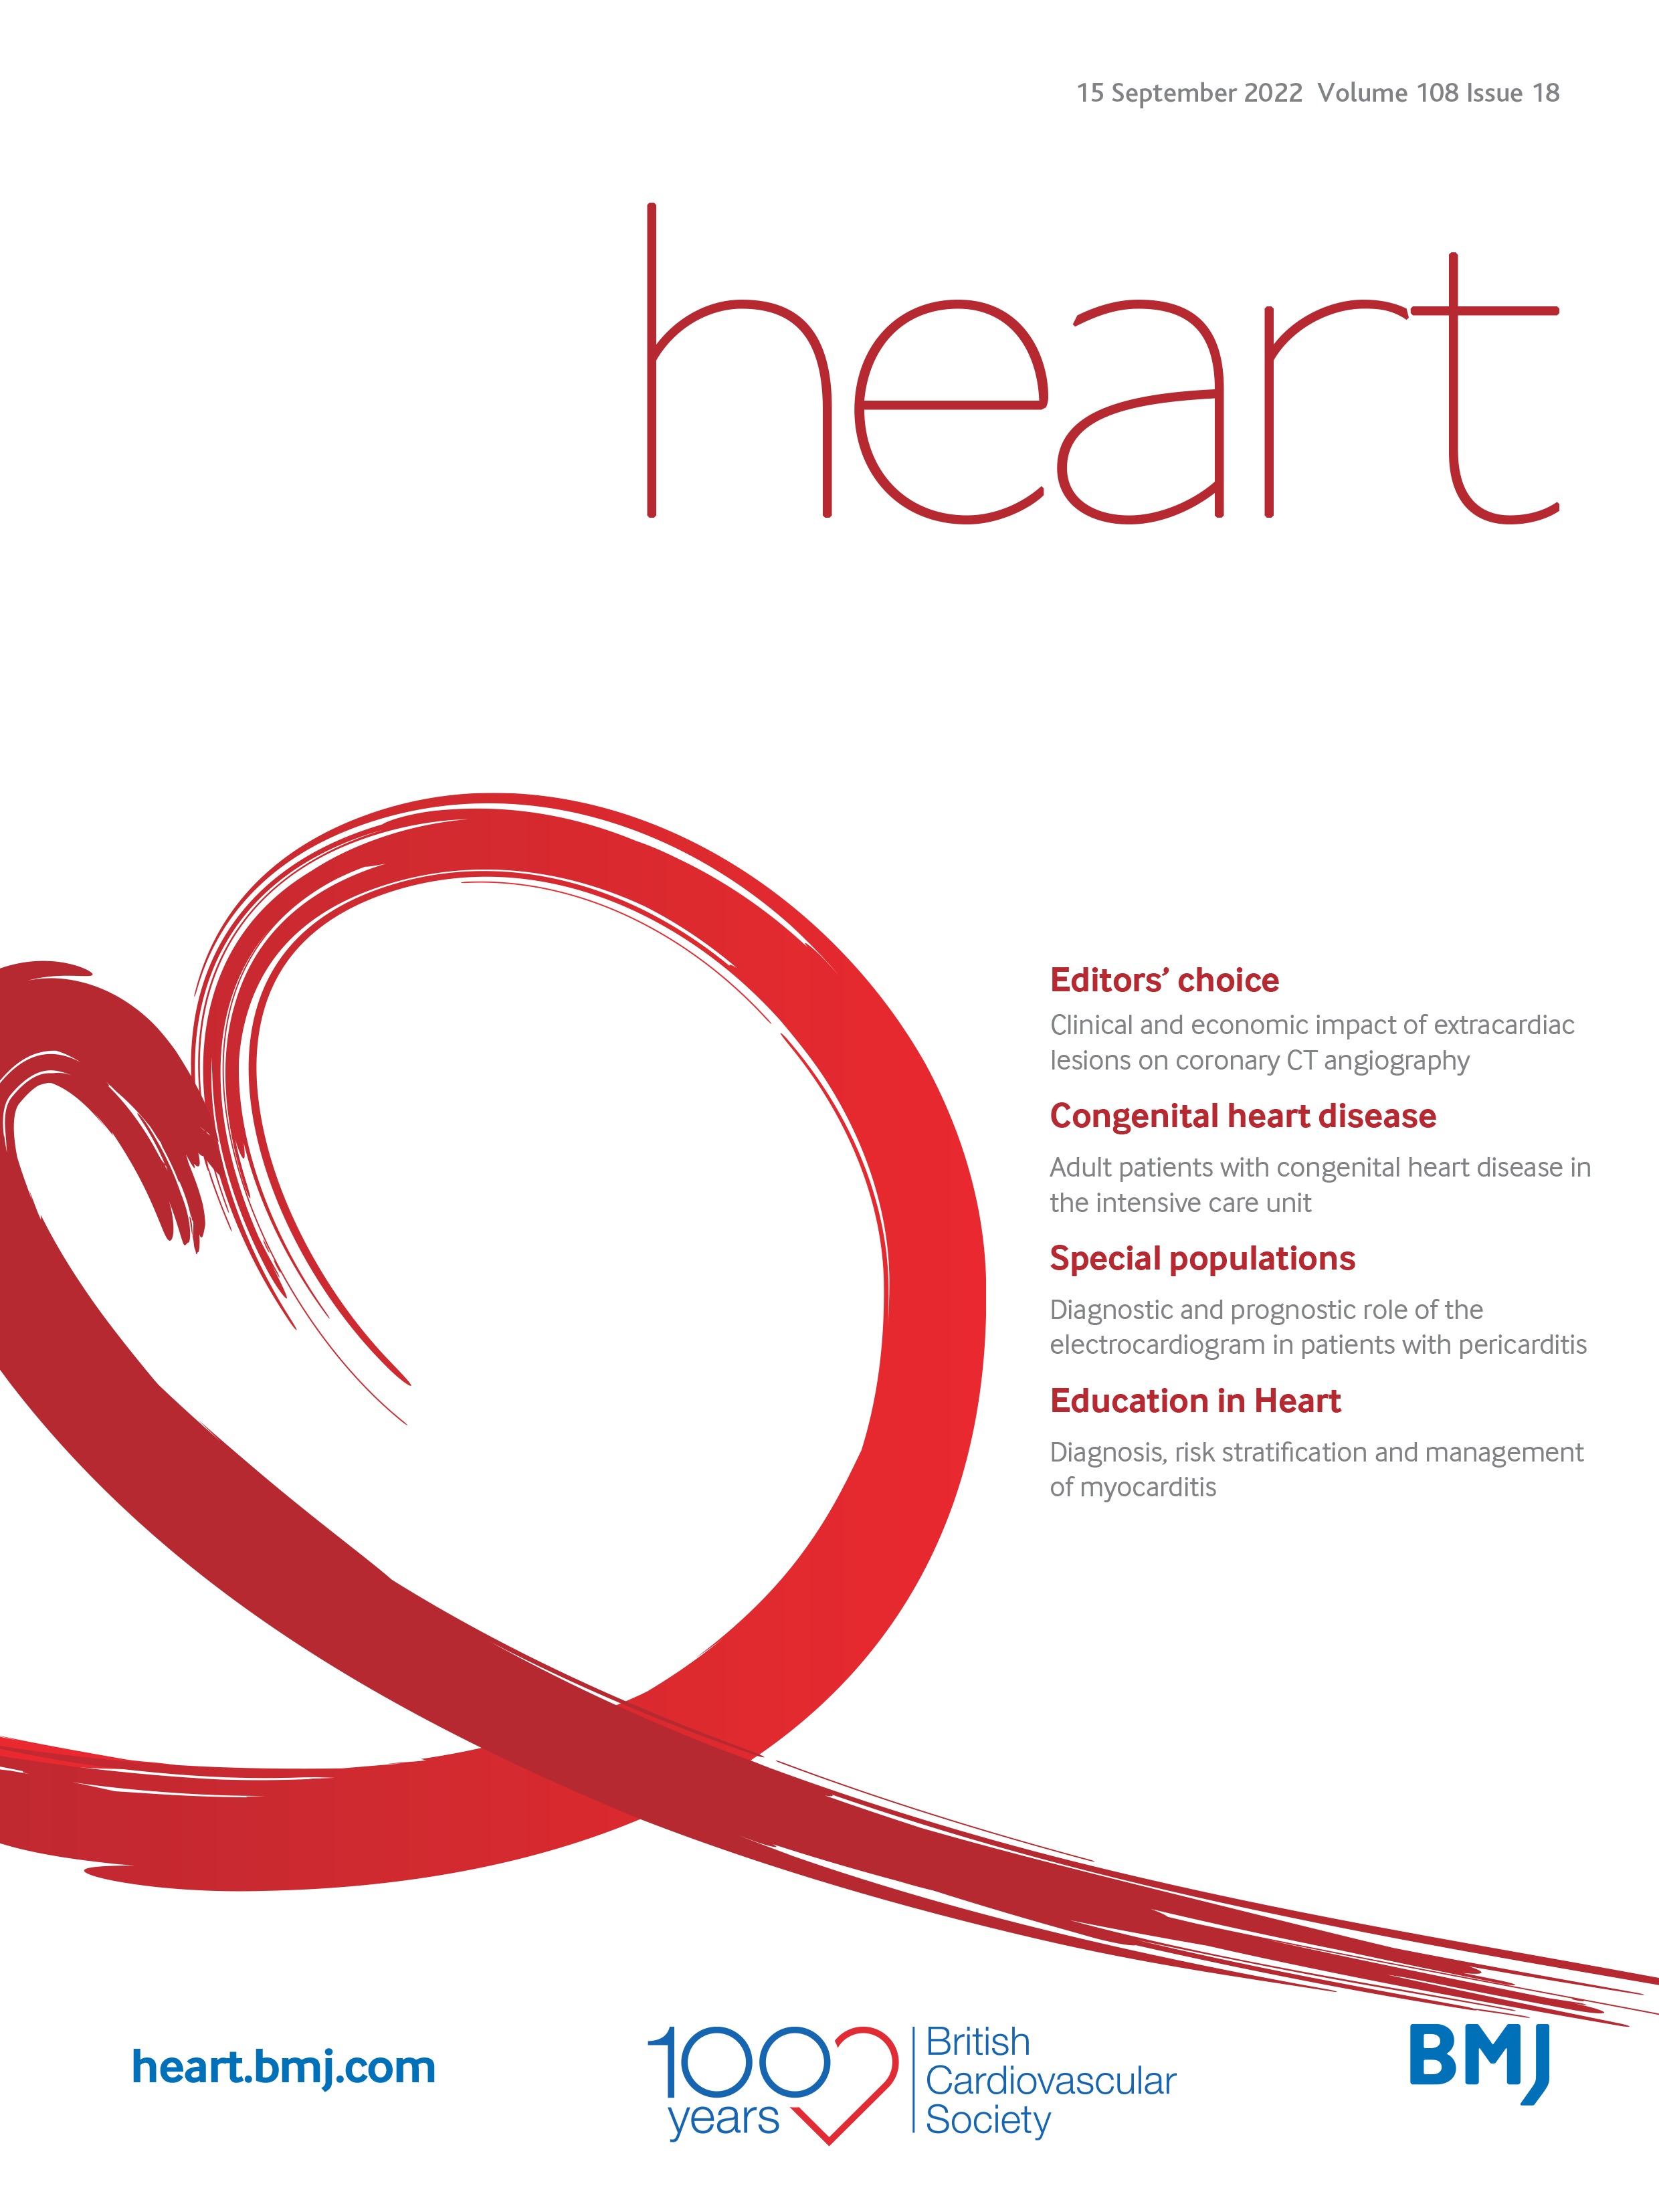 Sex-specific differences in adverse outcome events among patients with atrial fibrillation